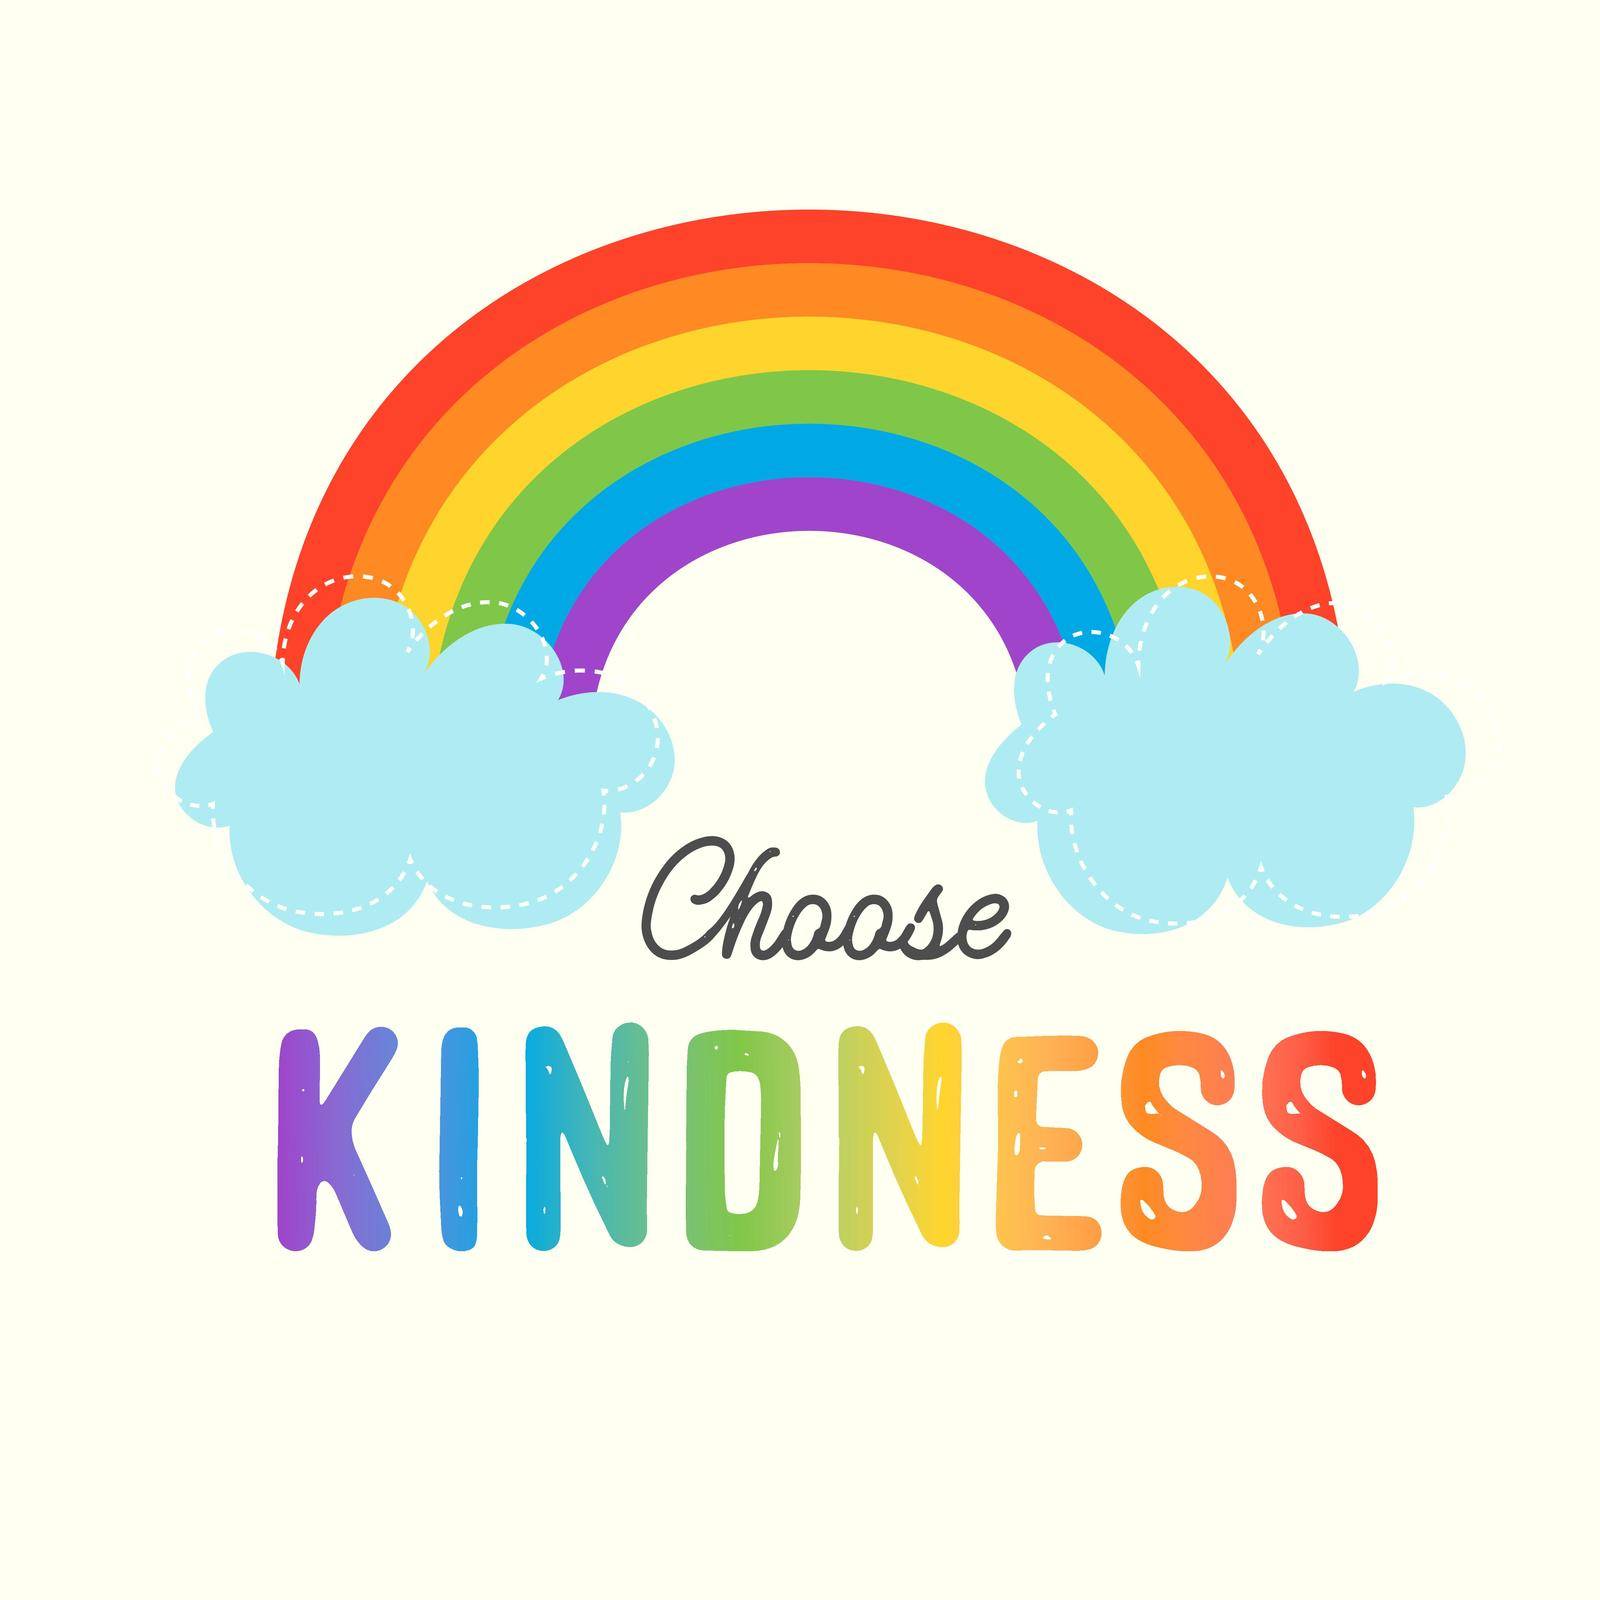 Choose kindness - Cute hand drawn nursery poster with lettering in scandinavian style. Kids vector illustration